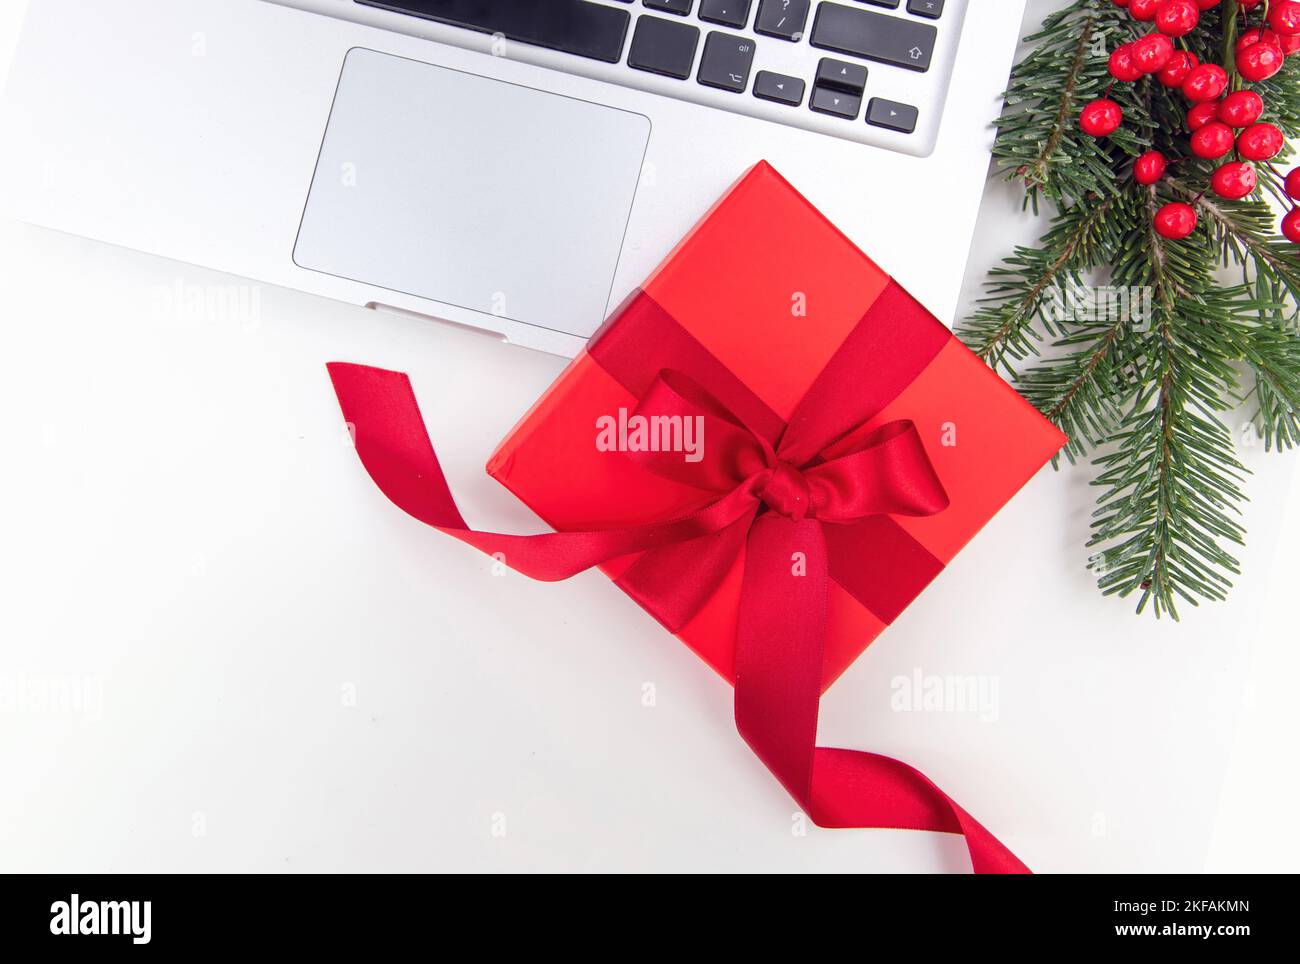 Christmas Holiday. Red gift box, computer laptop and Xmas decoration on white background, top view, copy space. Stock Photo